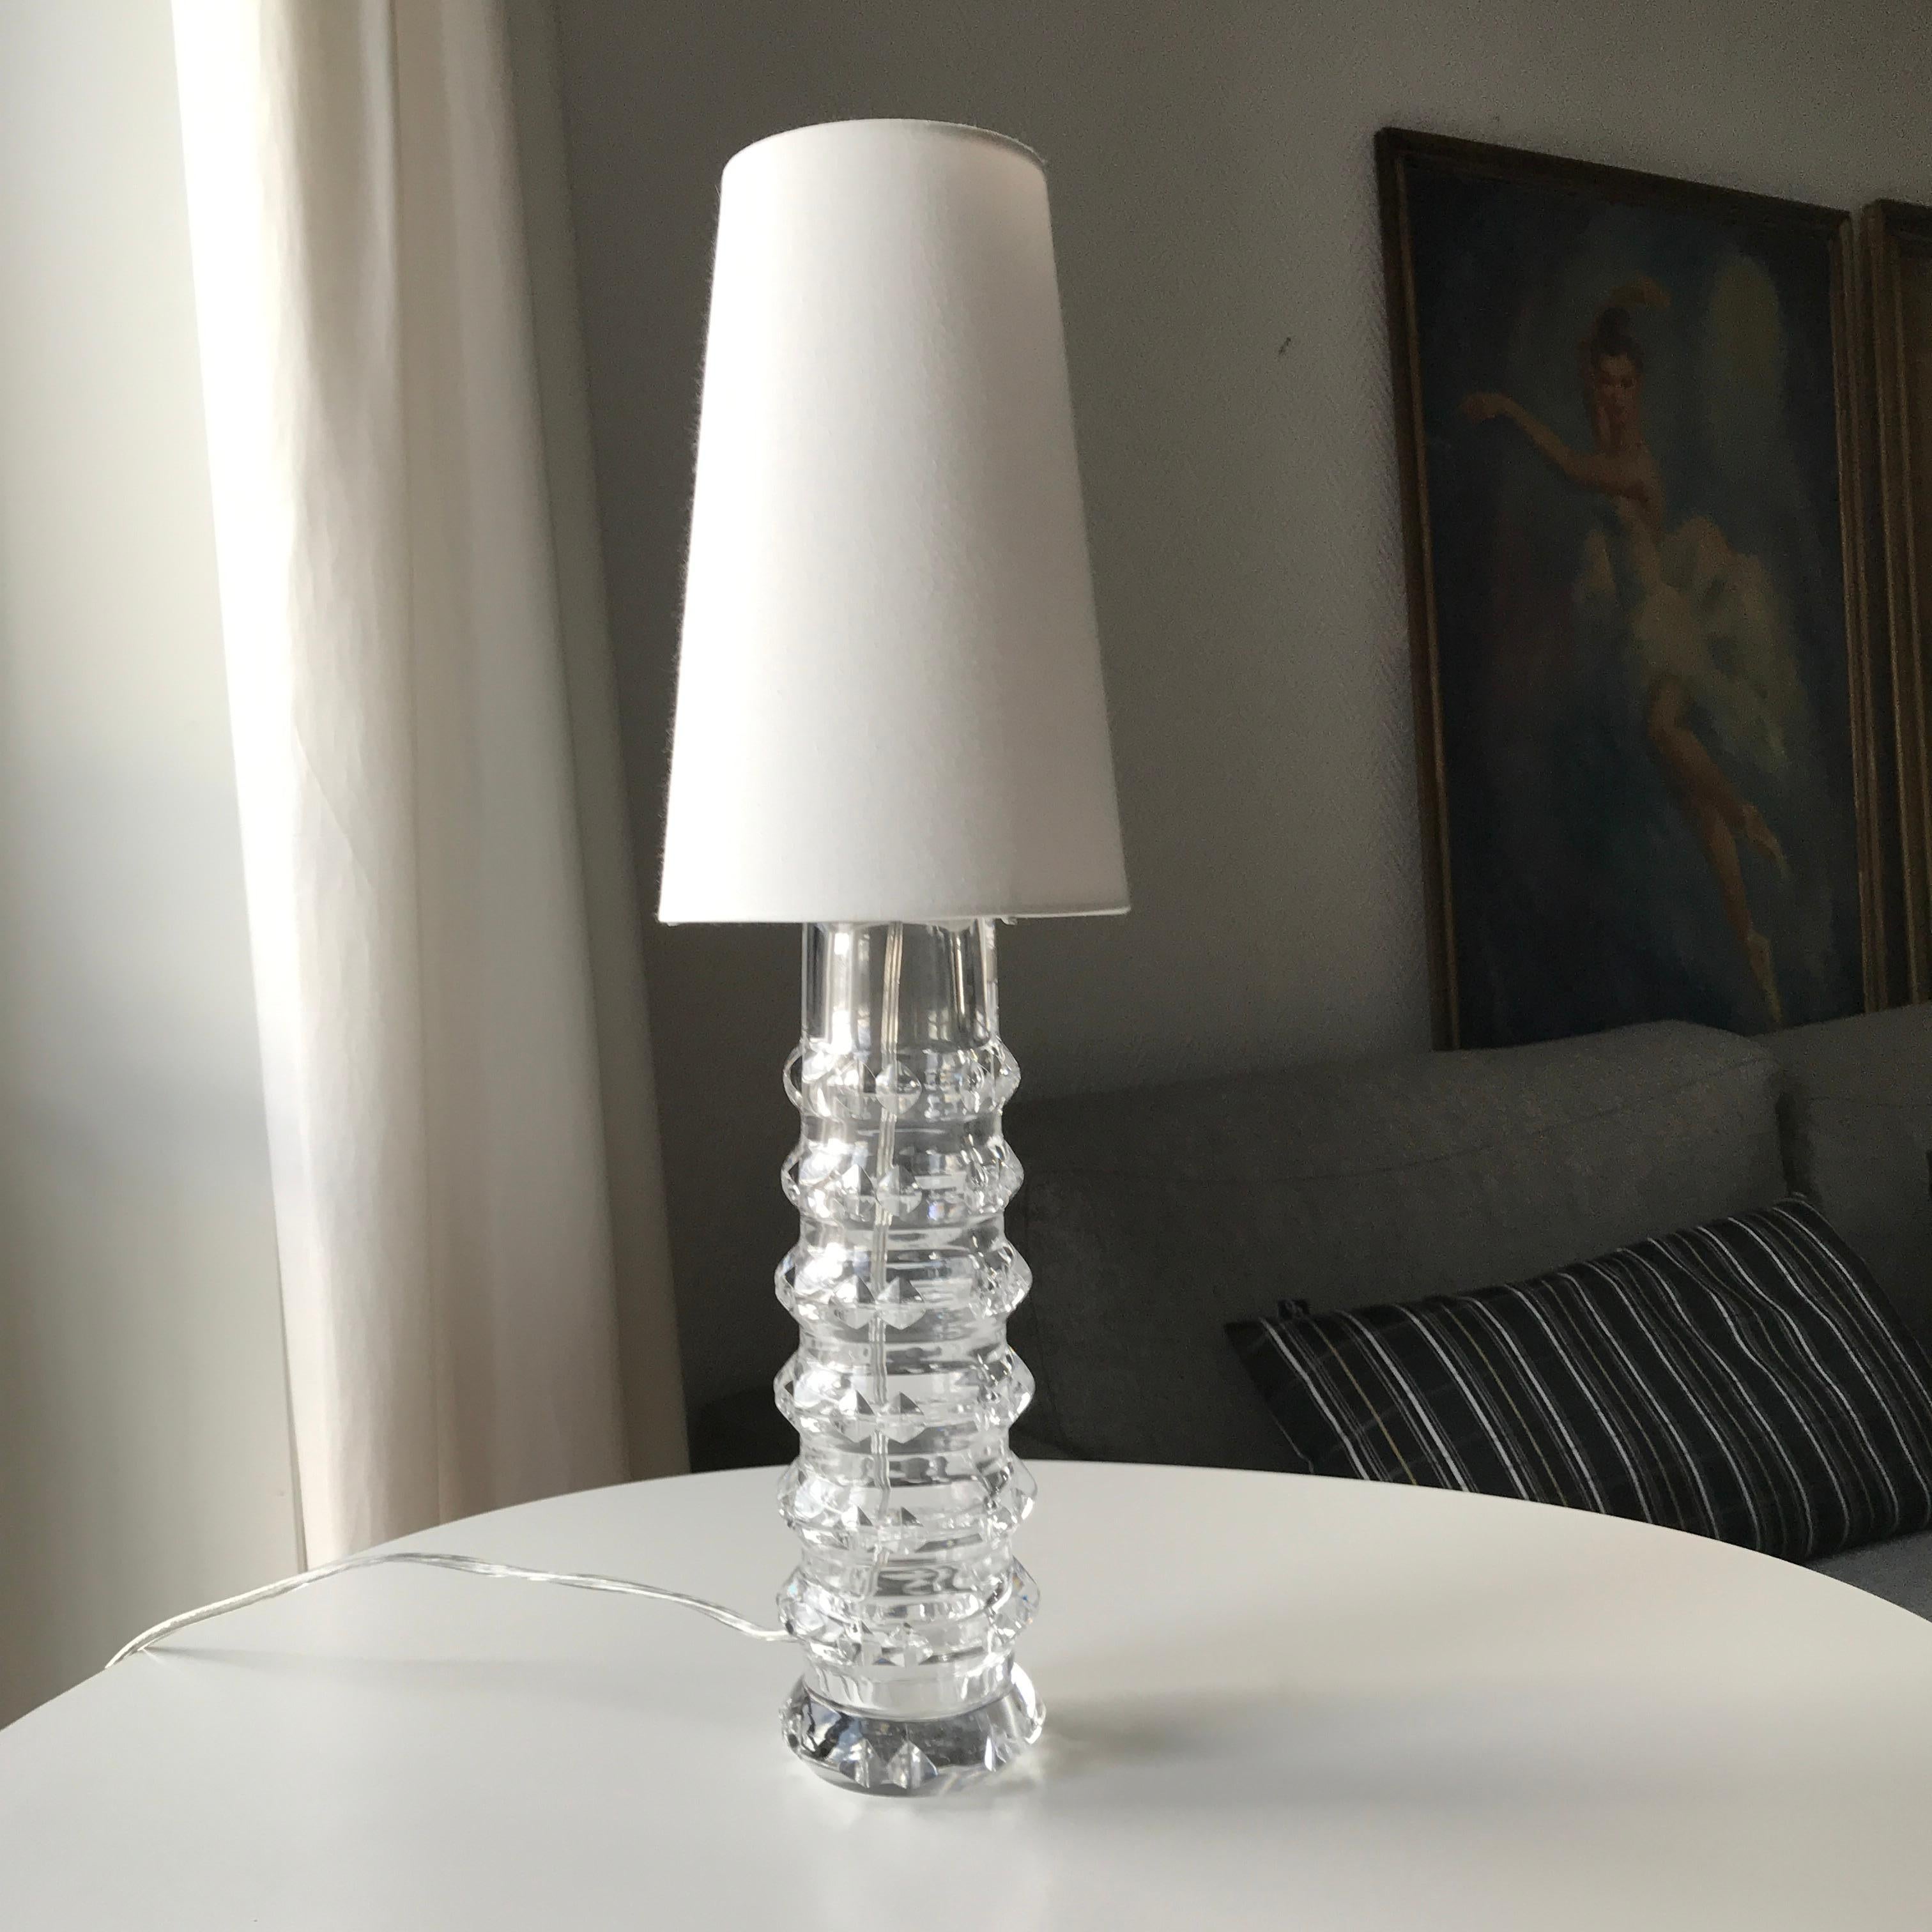 Scandinavian Modern Orrefors Crystal Lamp RD 2047 Design by Carl Fagerlund For Sale 3